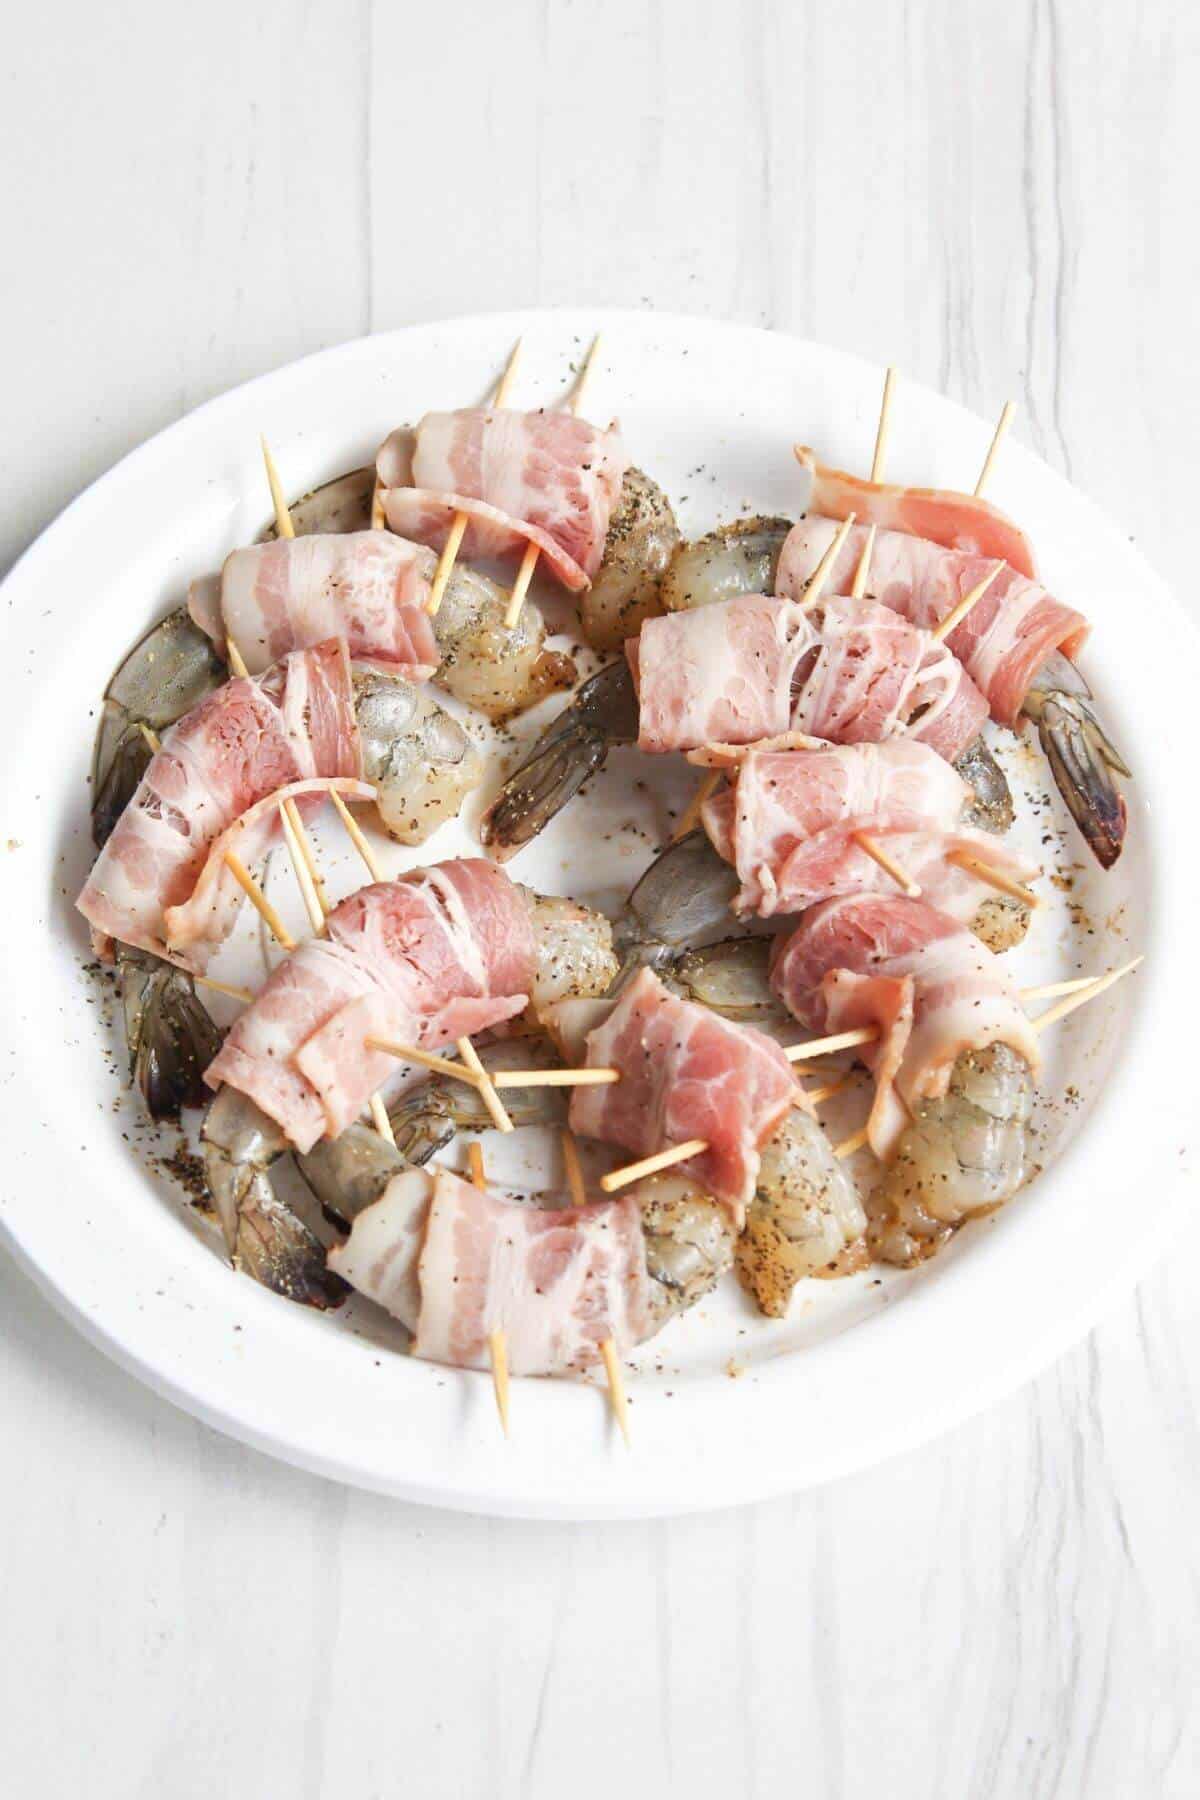 Bacon wrapped shrimp secured with toothpicks.